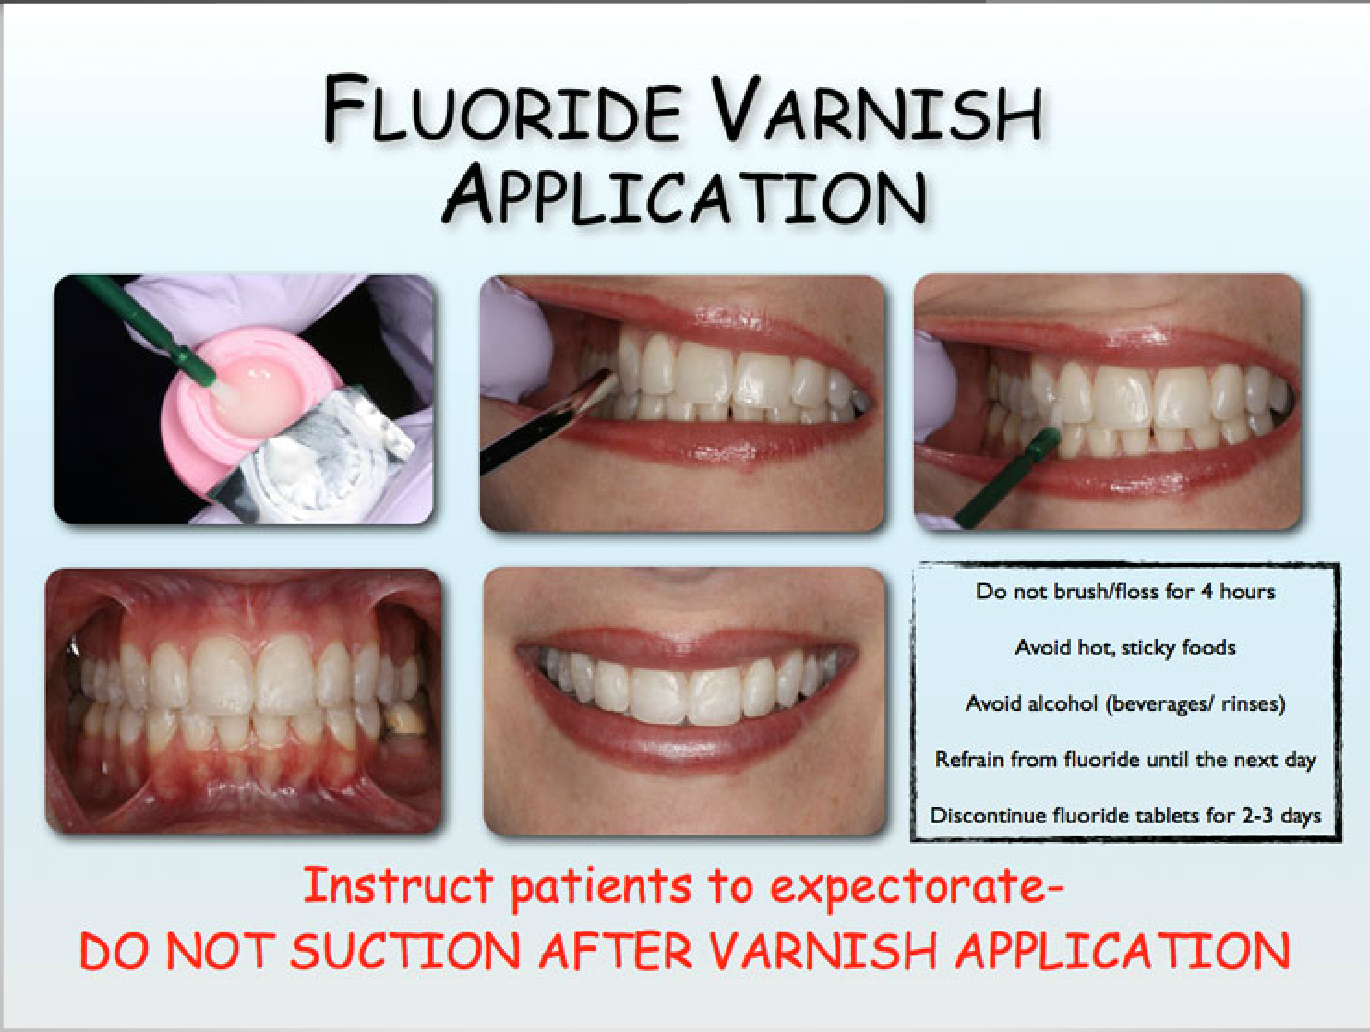 Webinar: Using Fluoride Varnish for Improved Patient Outcomes